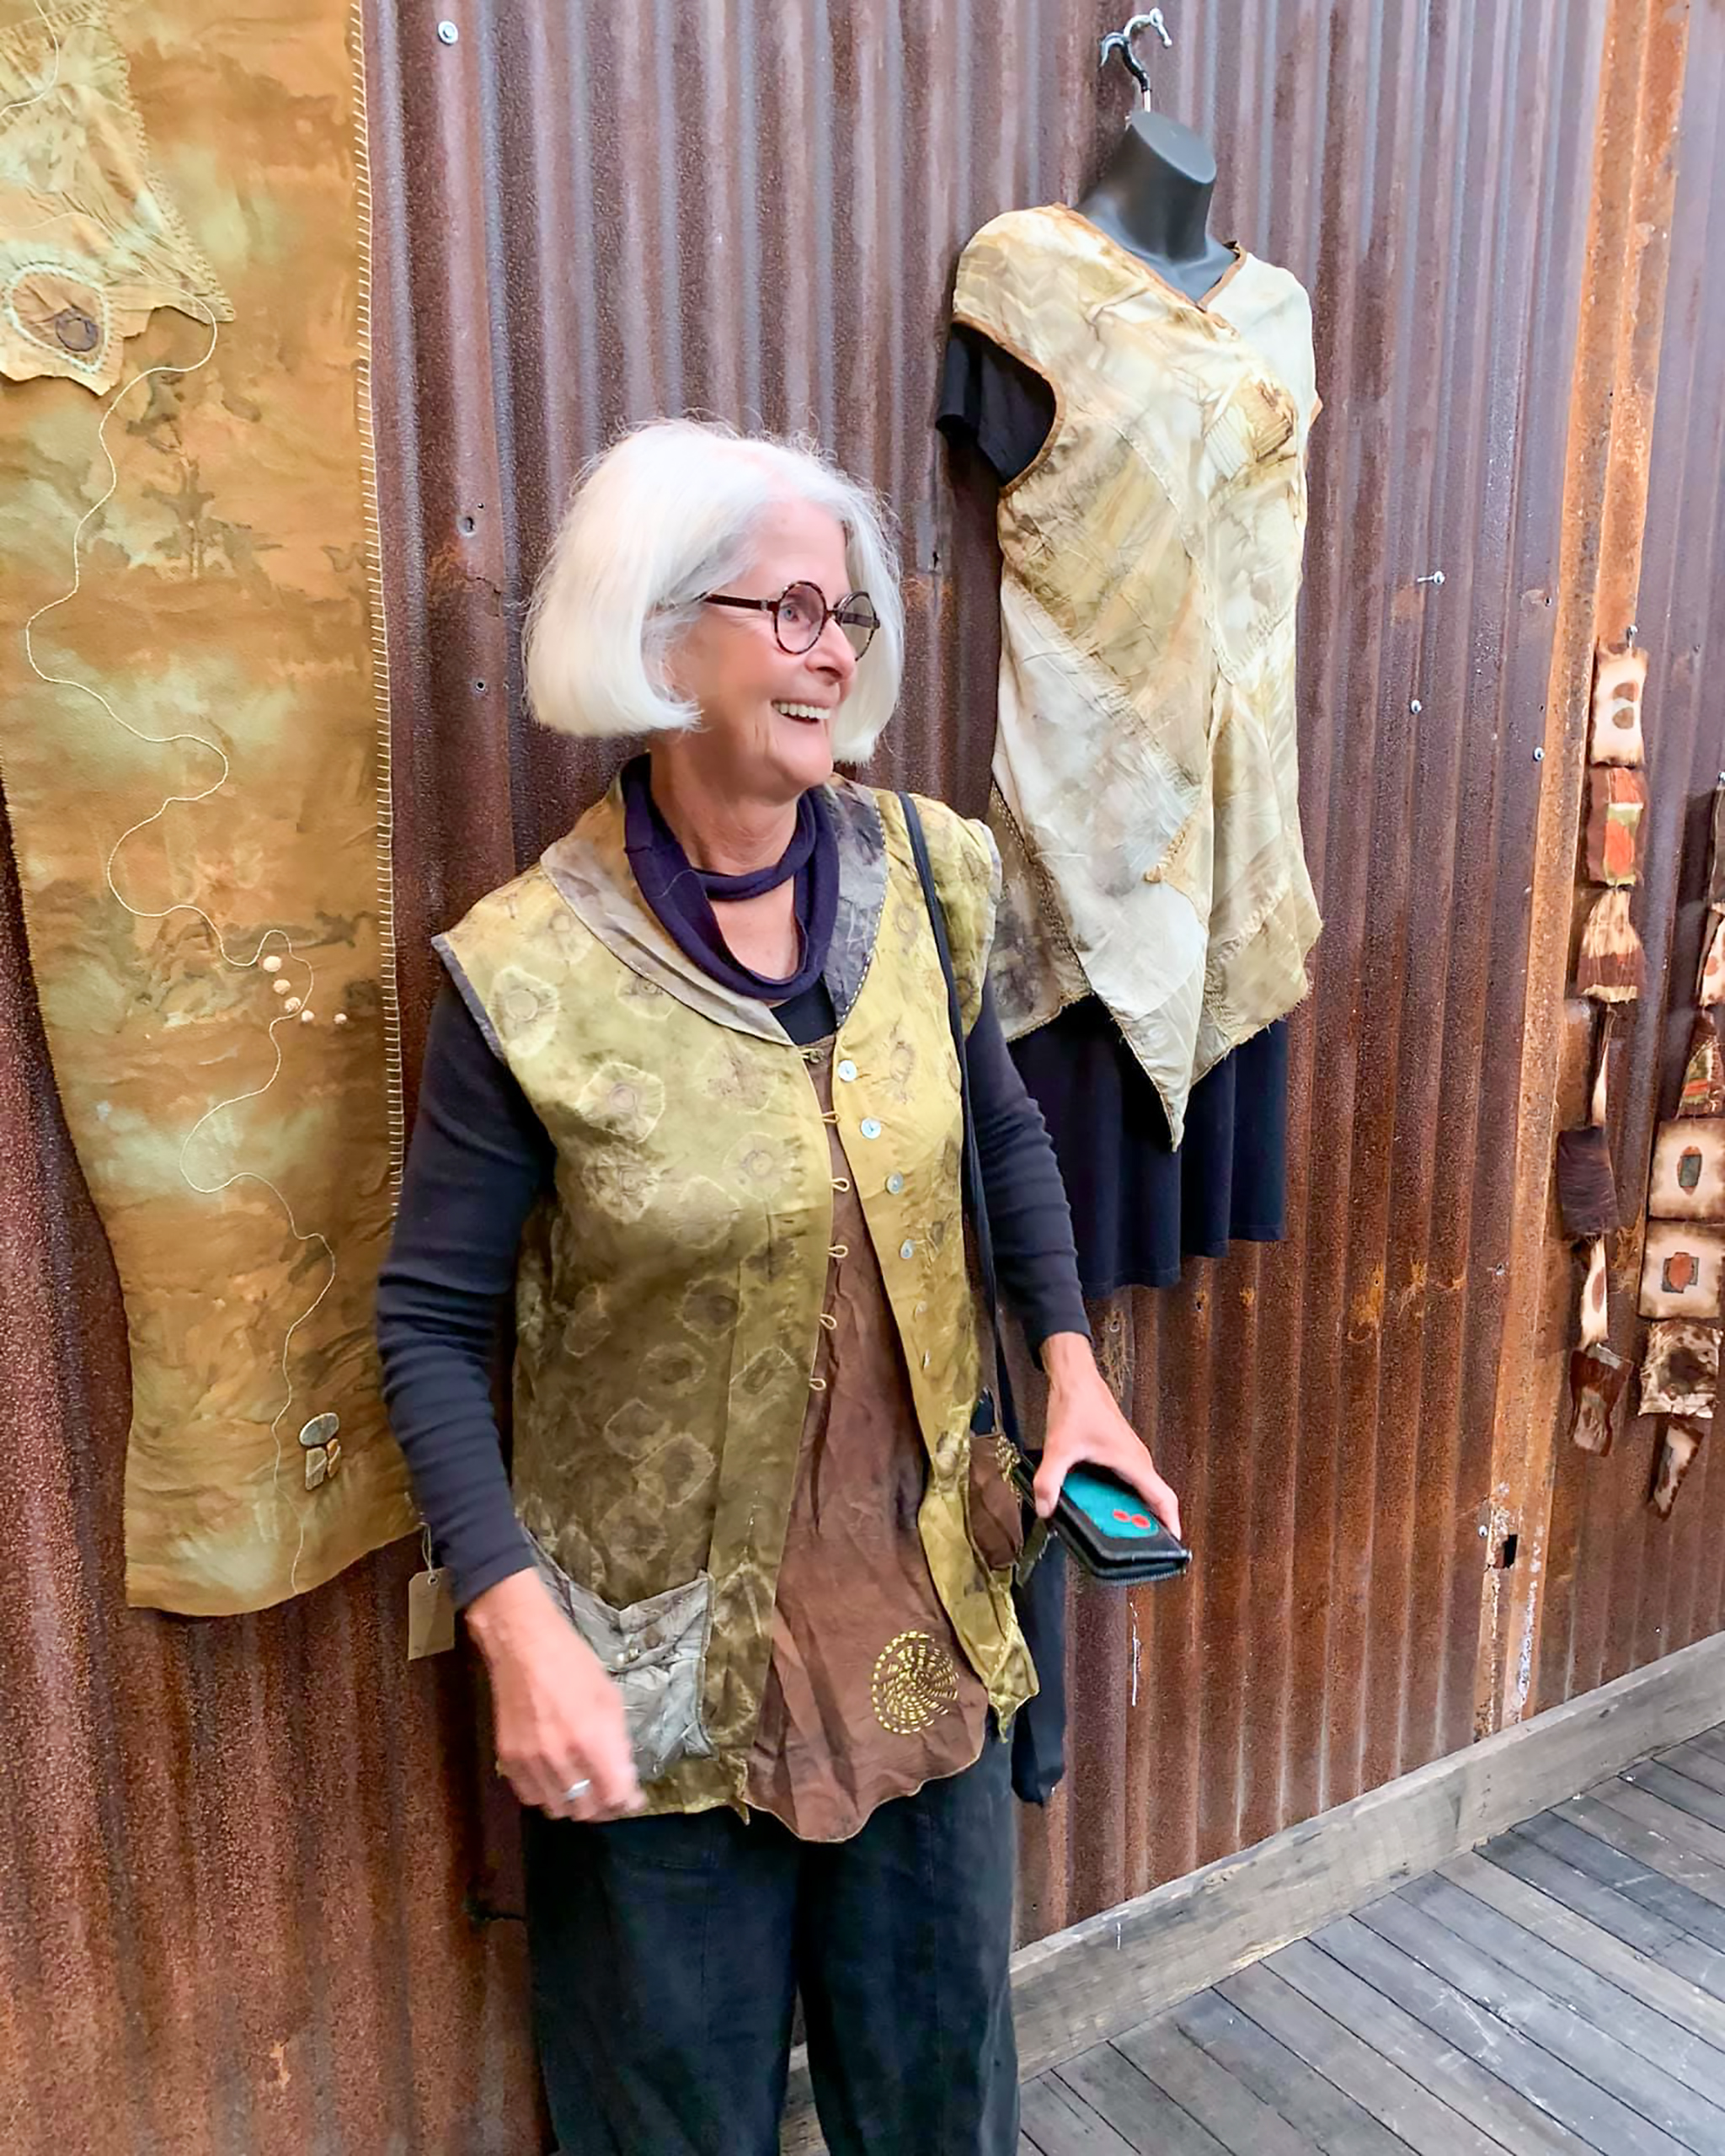 The image shows textile artist Aujke Boonstra in front of her eco-dyed fabrics for the Textile Art Retreat Found, Collected, Dyed, Stitched with Textile Artist Aujke Boonstra Art Trails Tasmania for her workshop at the Tin Dragon Trails Cottages